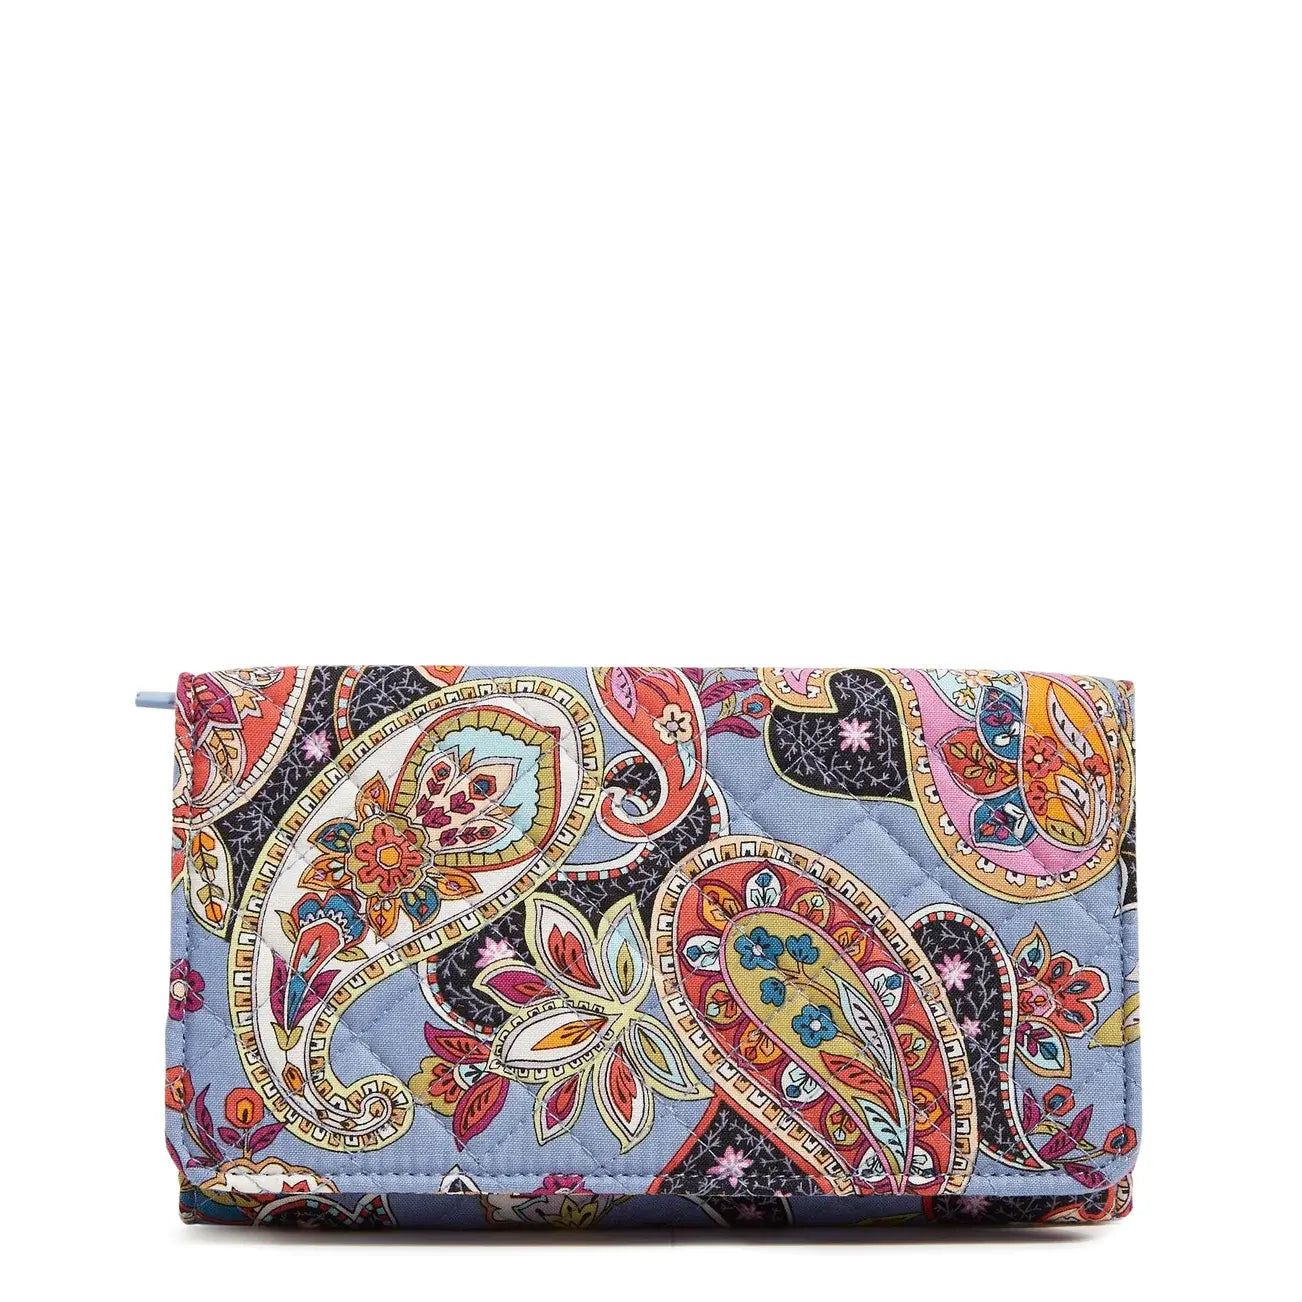 Vera Bradley RFID Trifold Clutch Wallet in Provence Paisley.